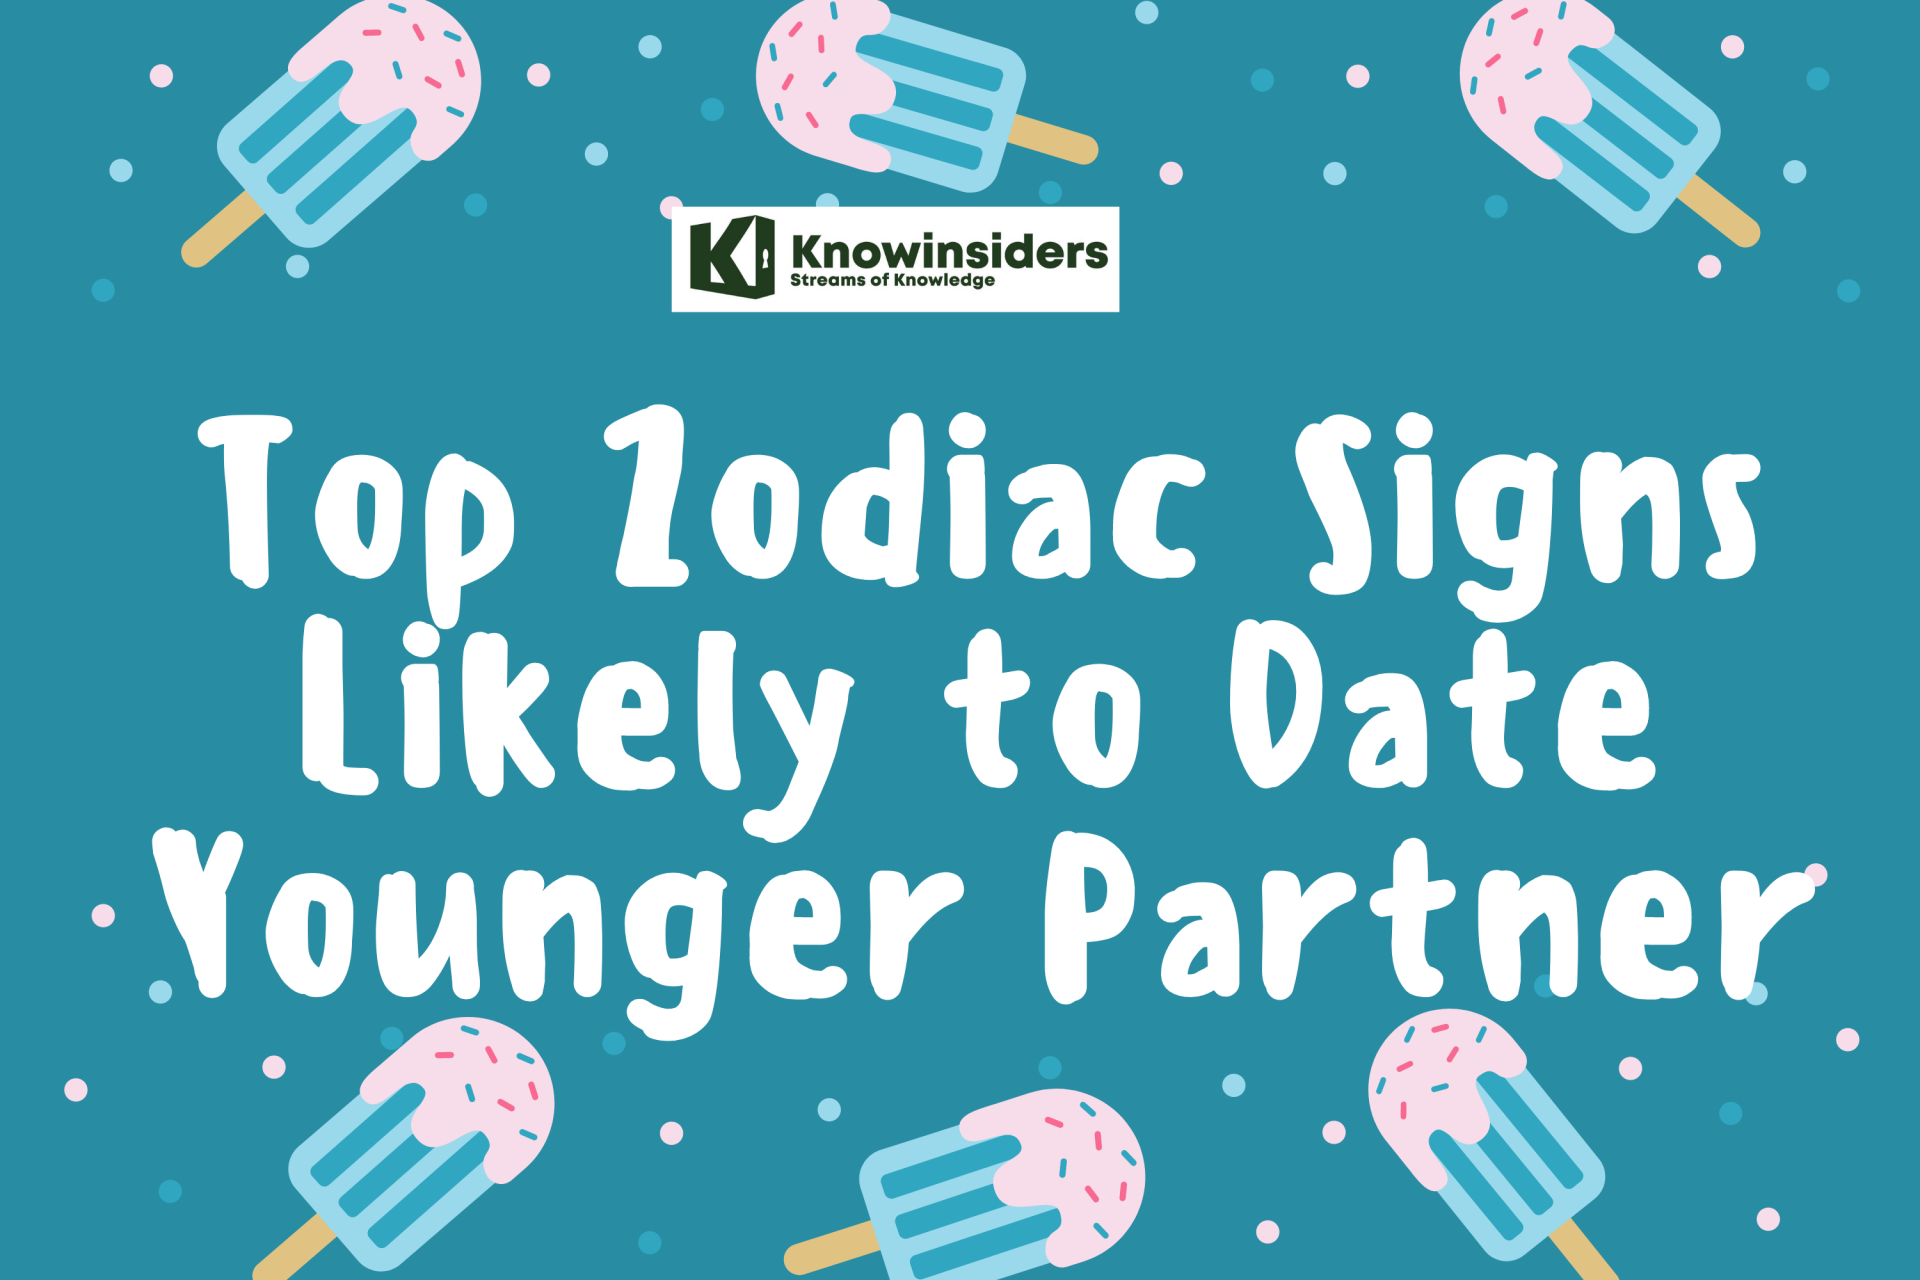 Zodiac Signs are likely to date younger partner. Photo: KnowInsiders